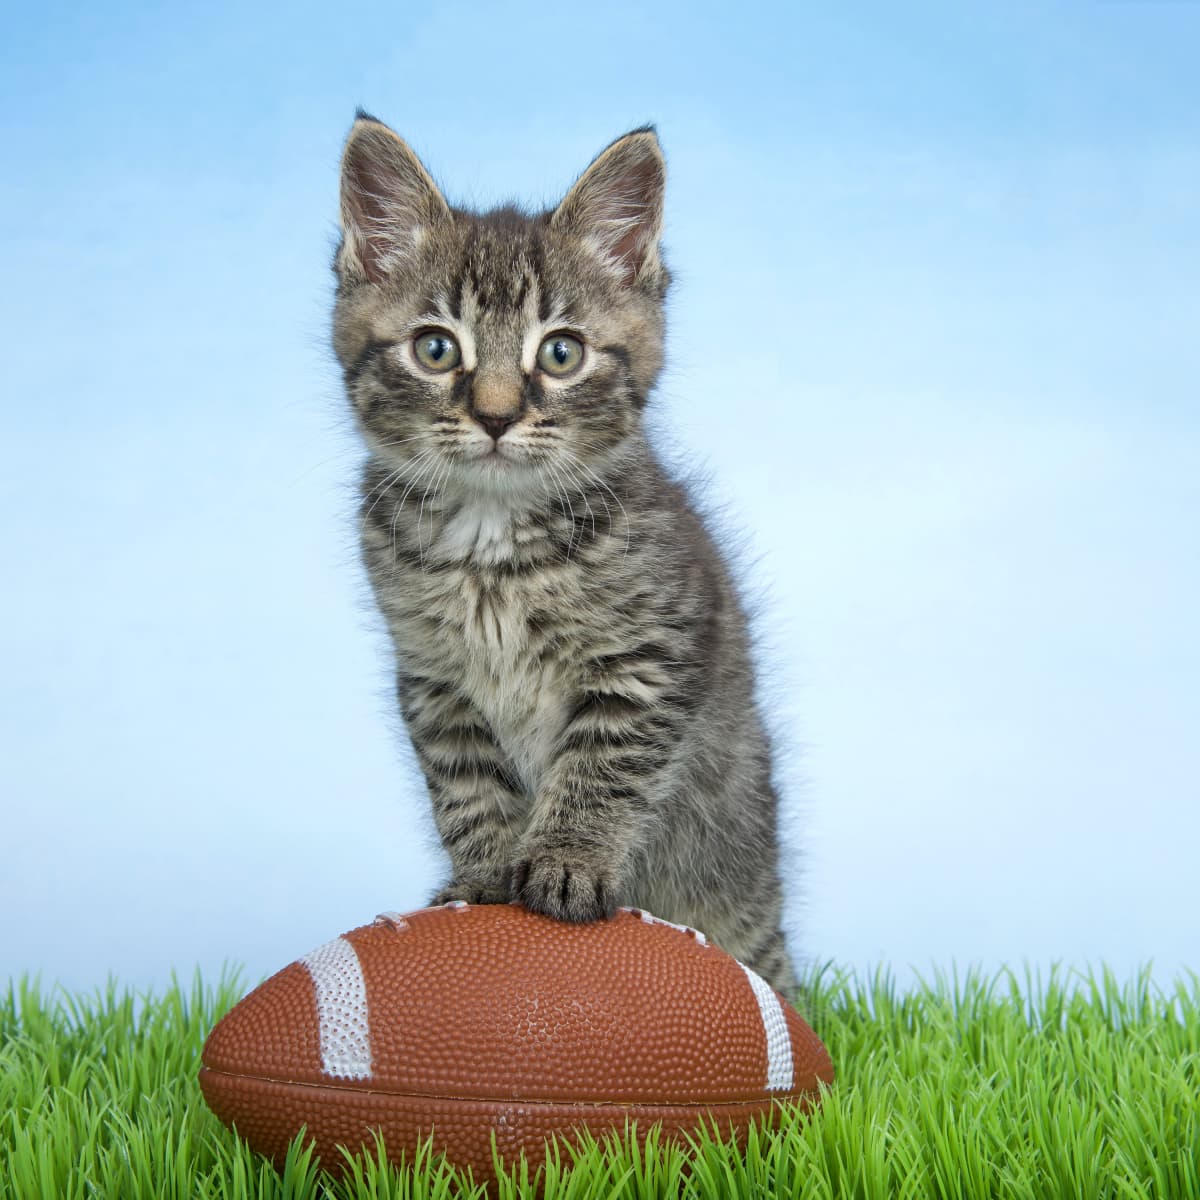 Kitten Attempting to Catch Football on TV Is Cracking Us Up - PetHelpful  News